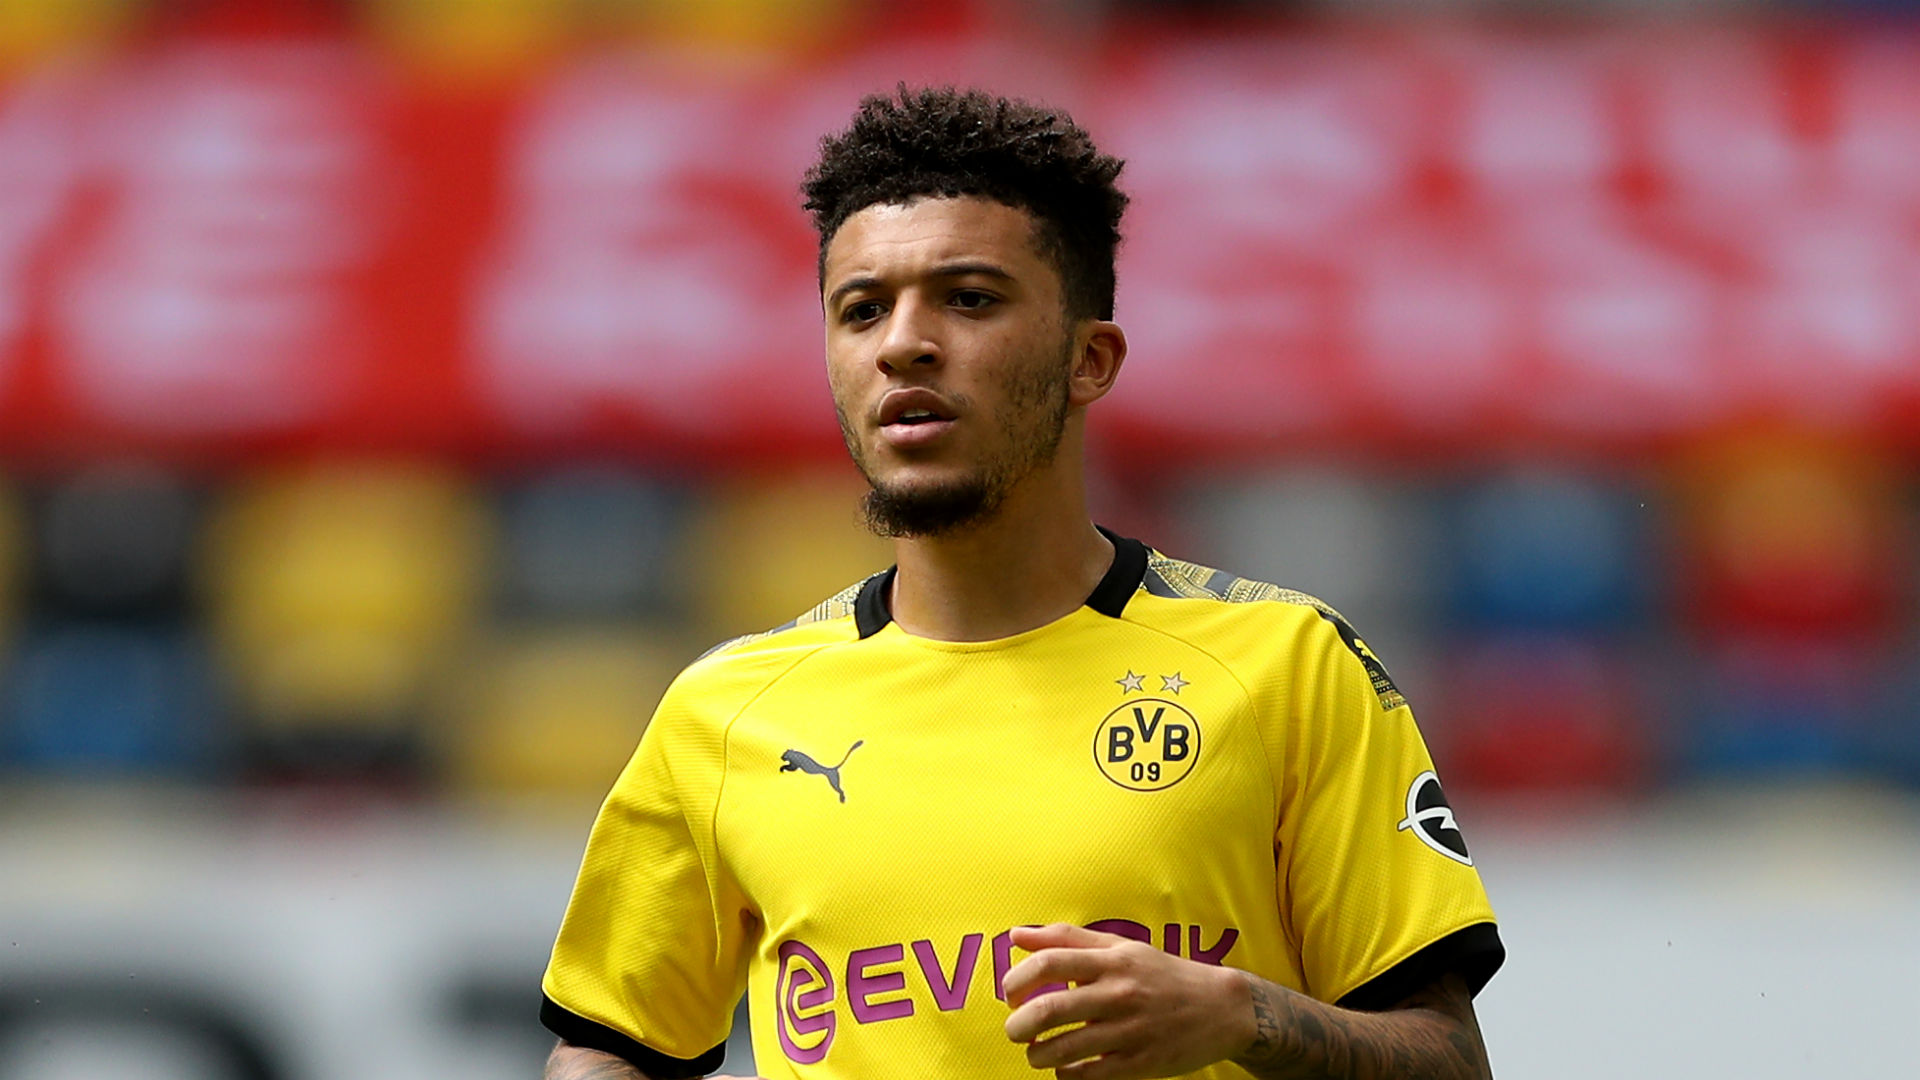 Jadon Sancho is reportedly expected to join Manchester United, but Ole Gunnar Solskjaer remained tight-lipped on Tuesday.